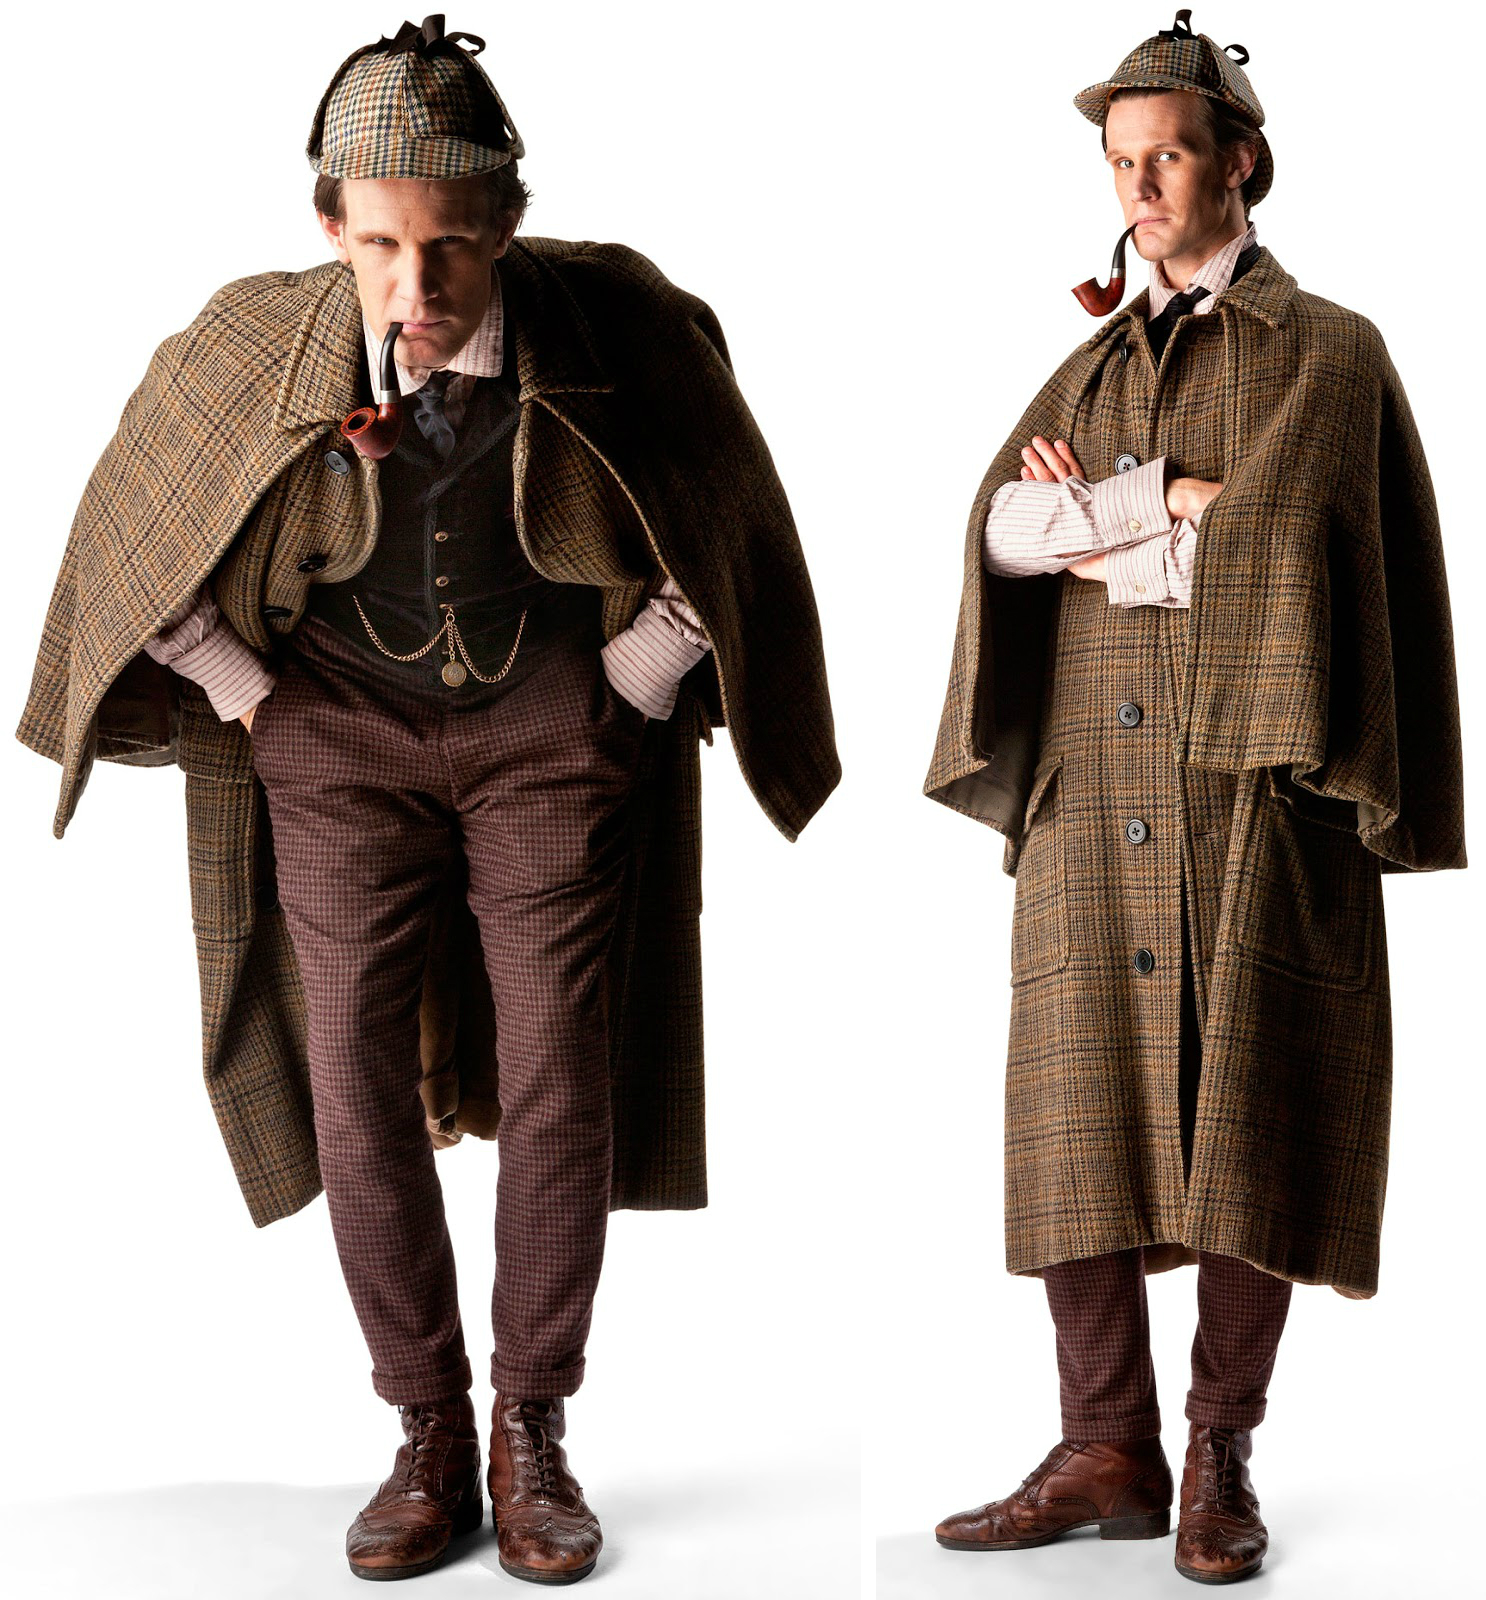 11th Doctor "Snowmen" costume analysis - Doctor Who Costume Guide